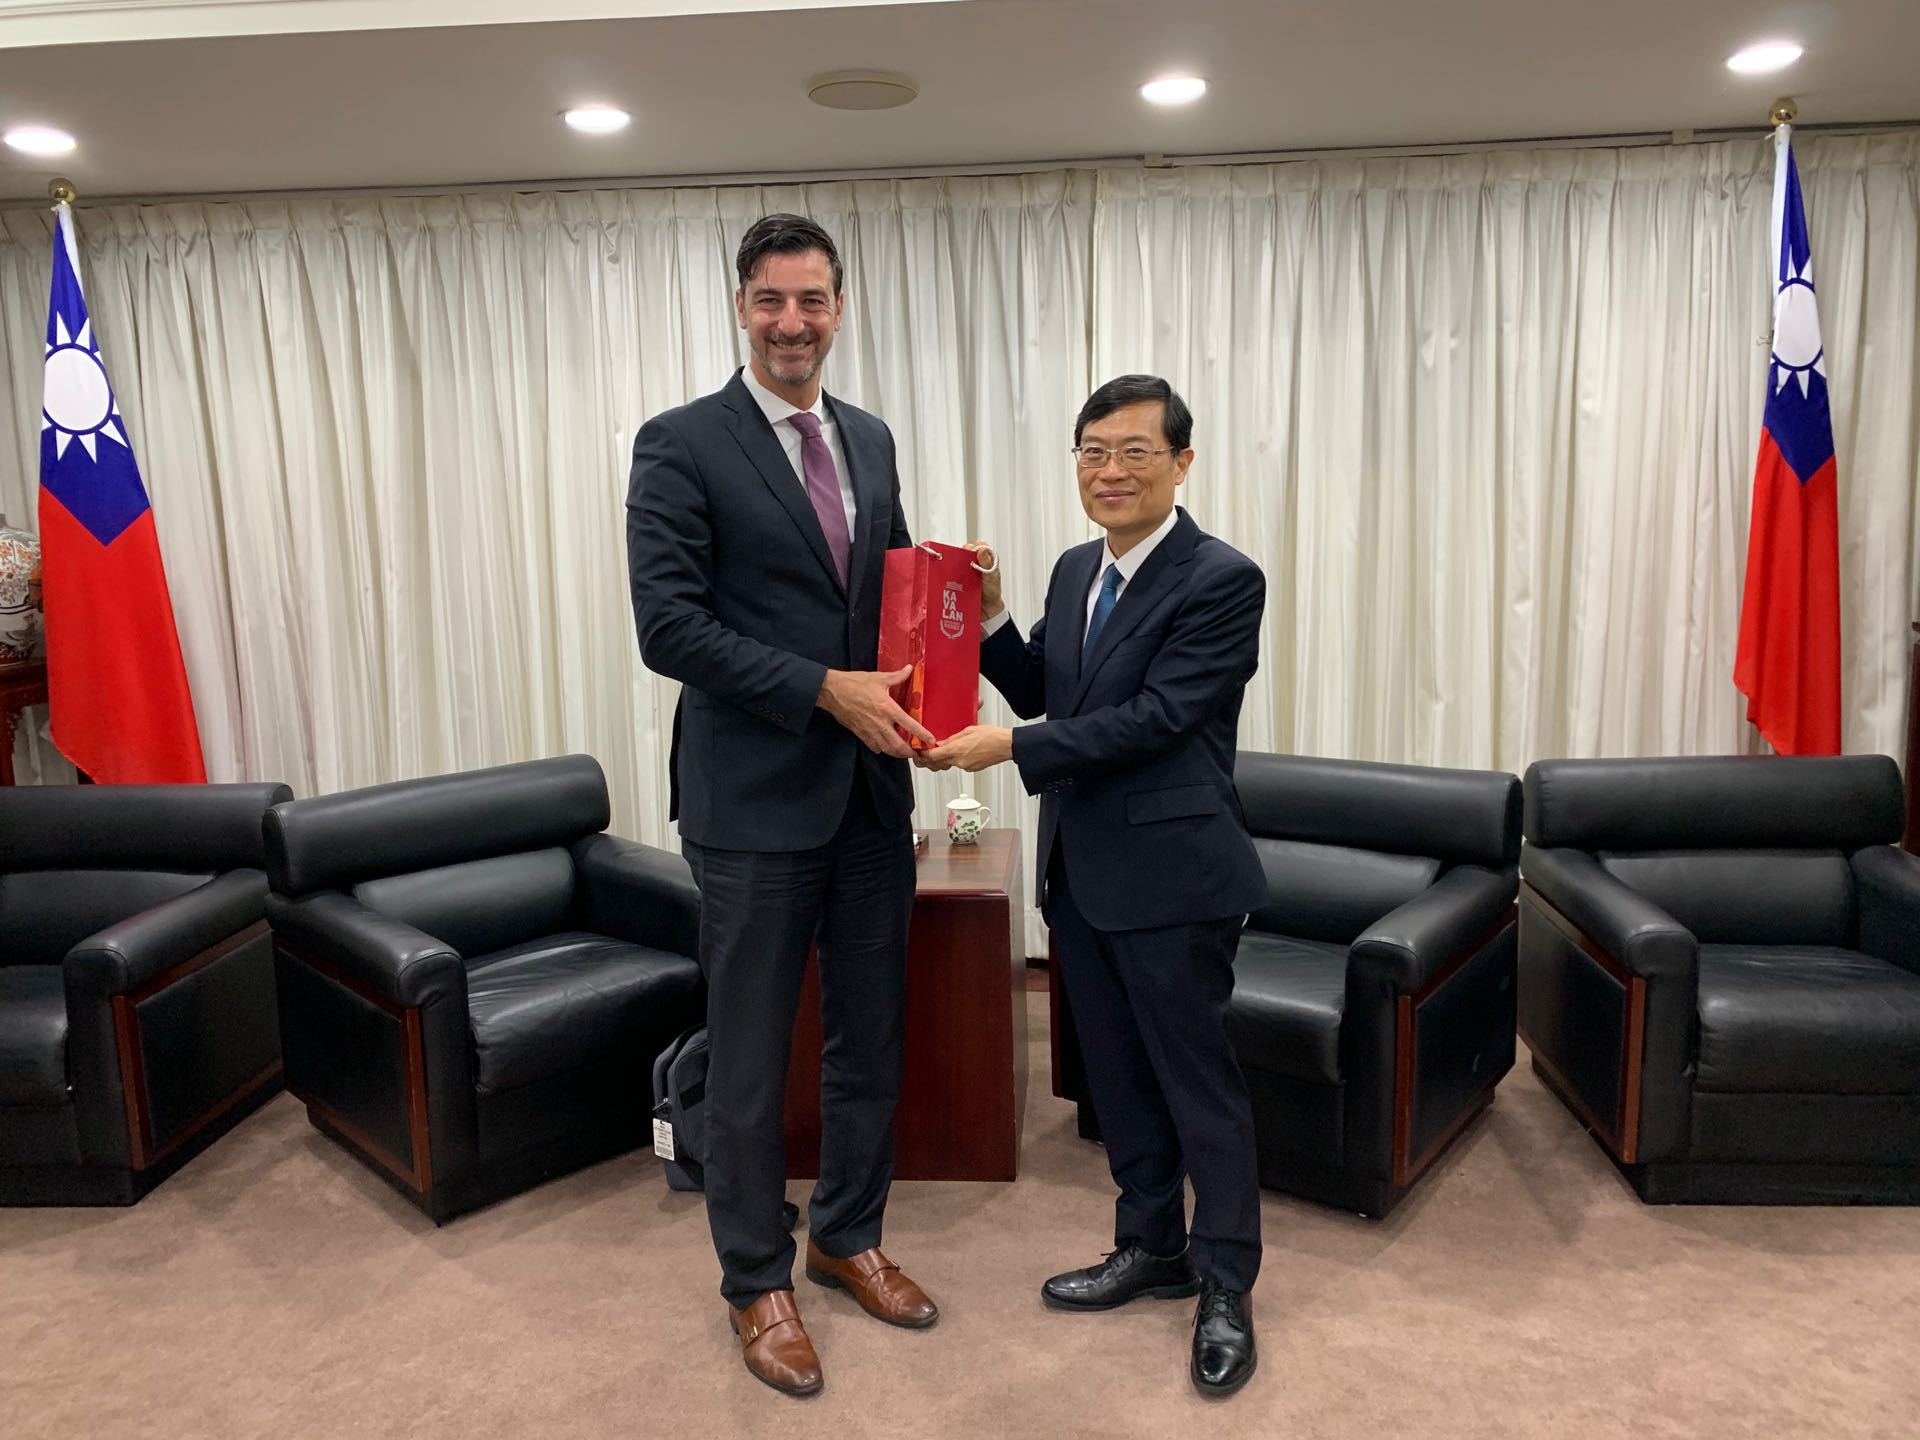 Deputy Minister Chen meets with ISED Associate Deputy Minister Francis Bilodeau